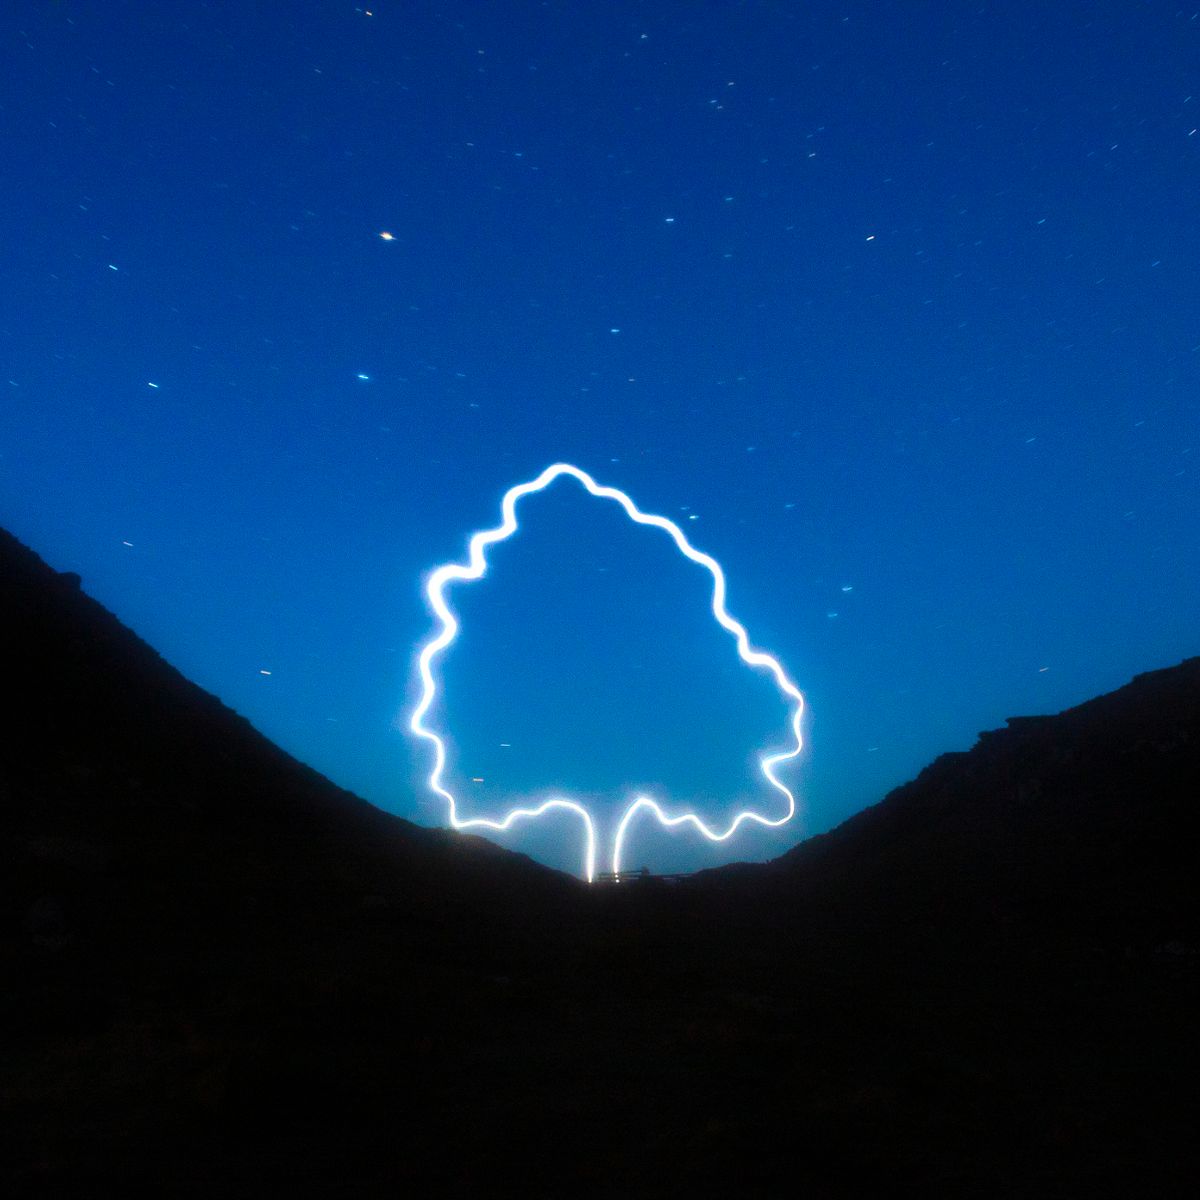 Claire Eason, UK artist, recently created a tribute to the Sycamore Gap tree, using light from drones in the space where the much loved landmark once stood #WomensArt